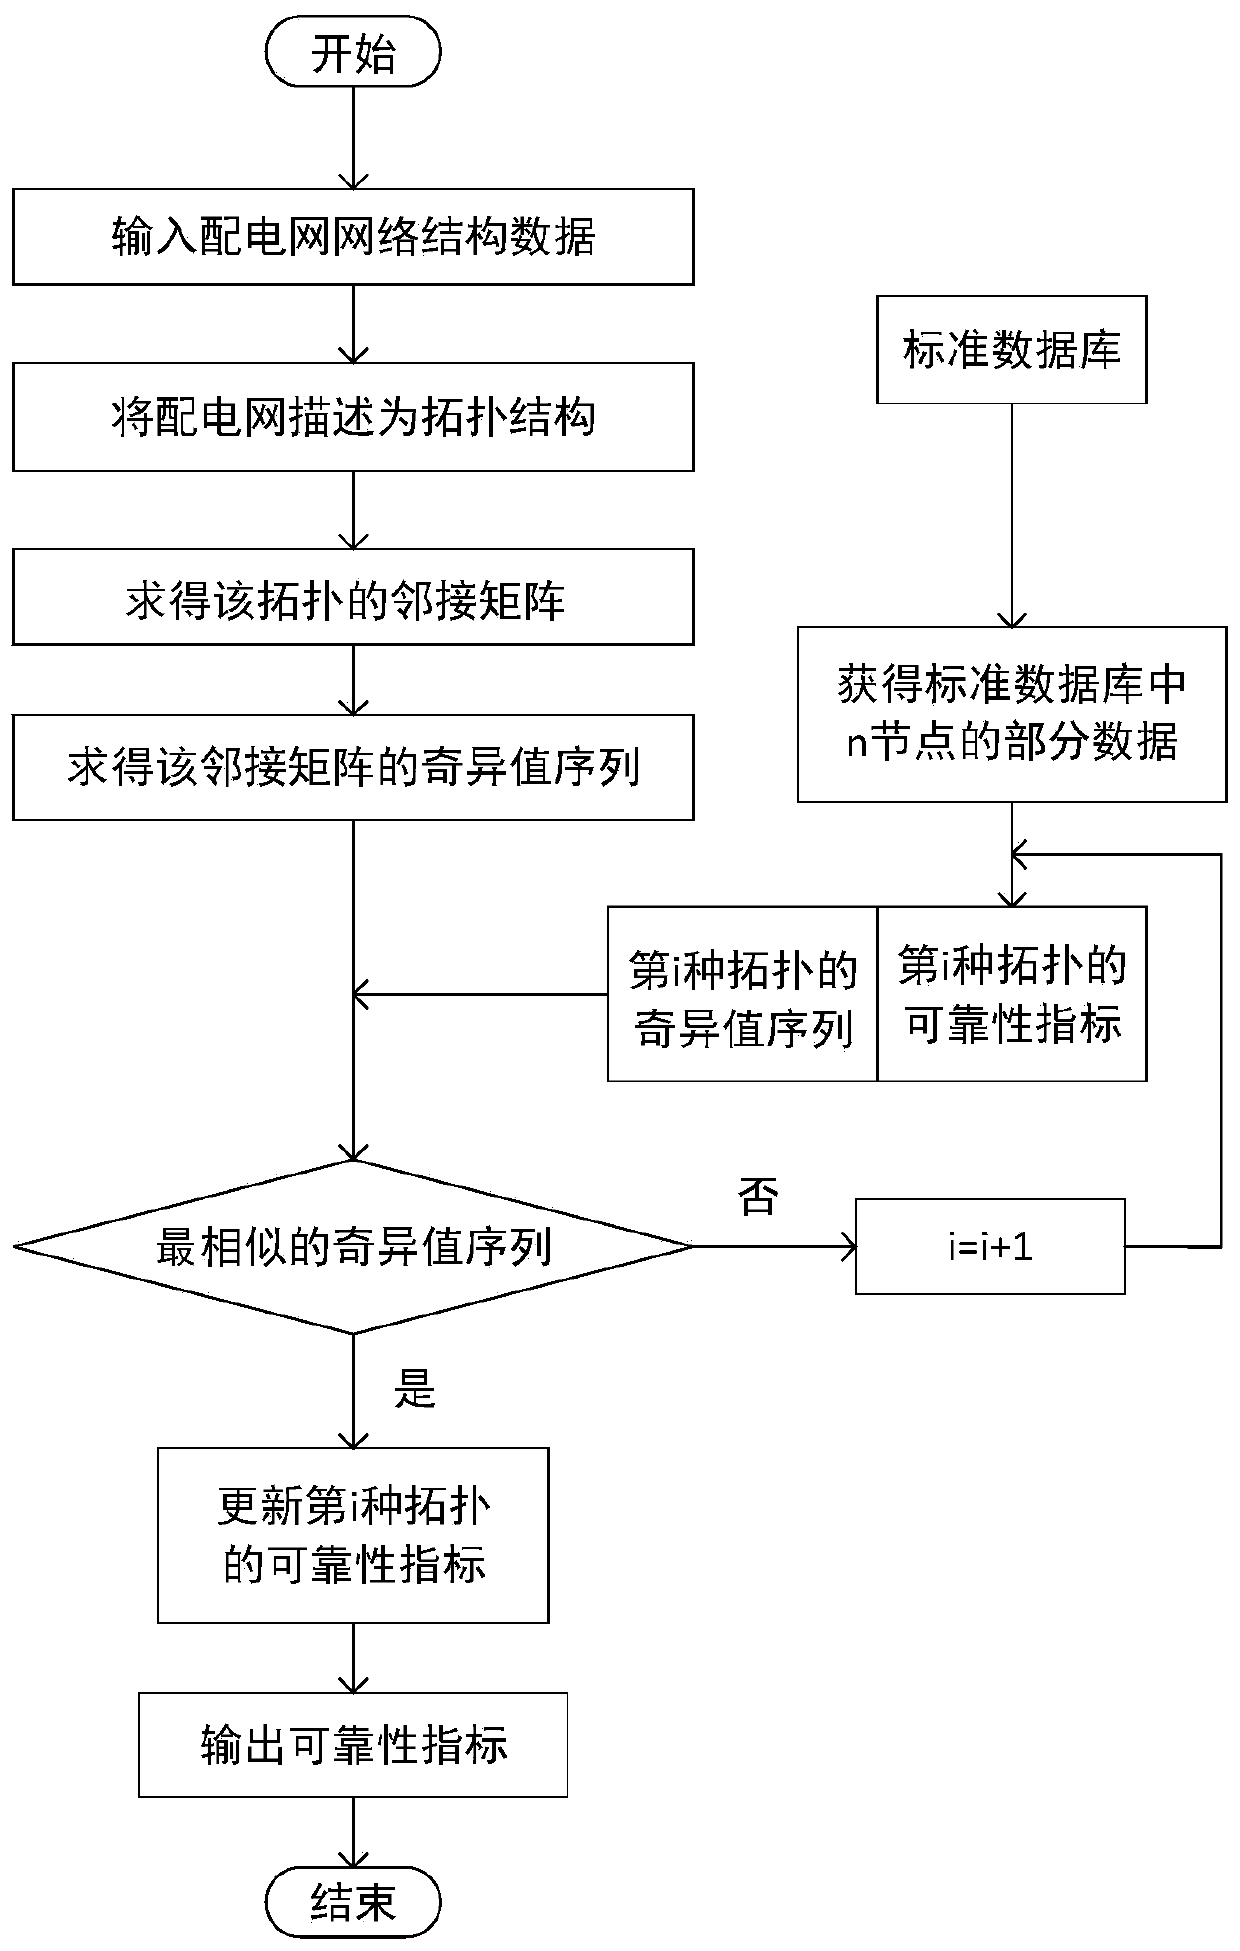 Power distribution network reliability rapid evaluation method in power system